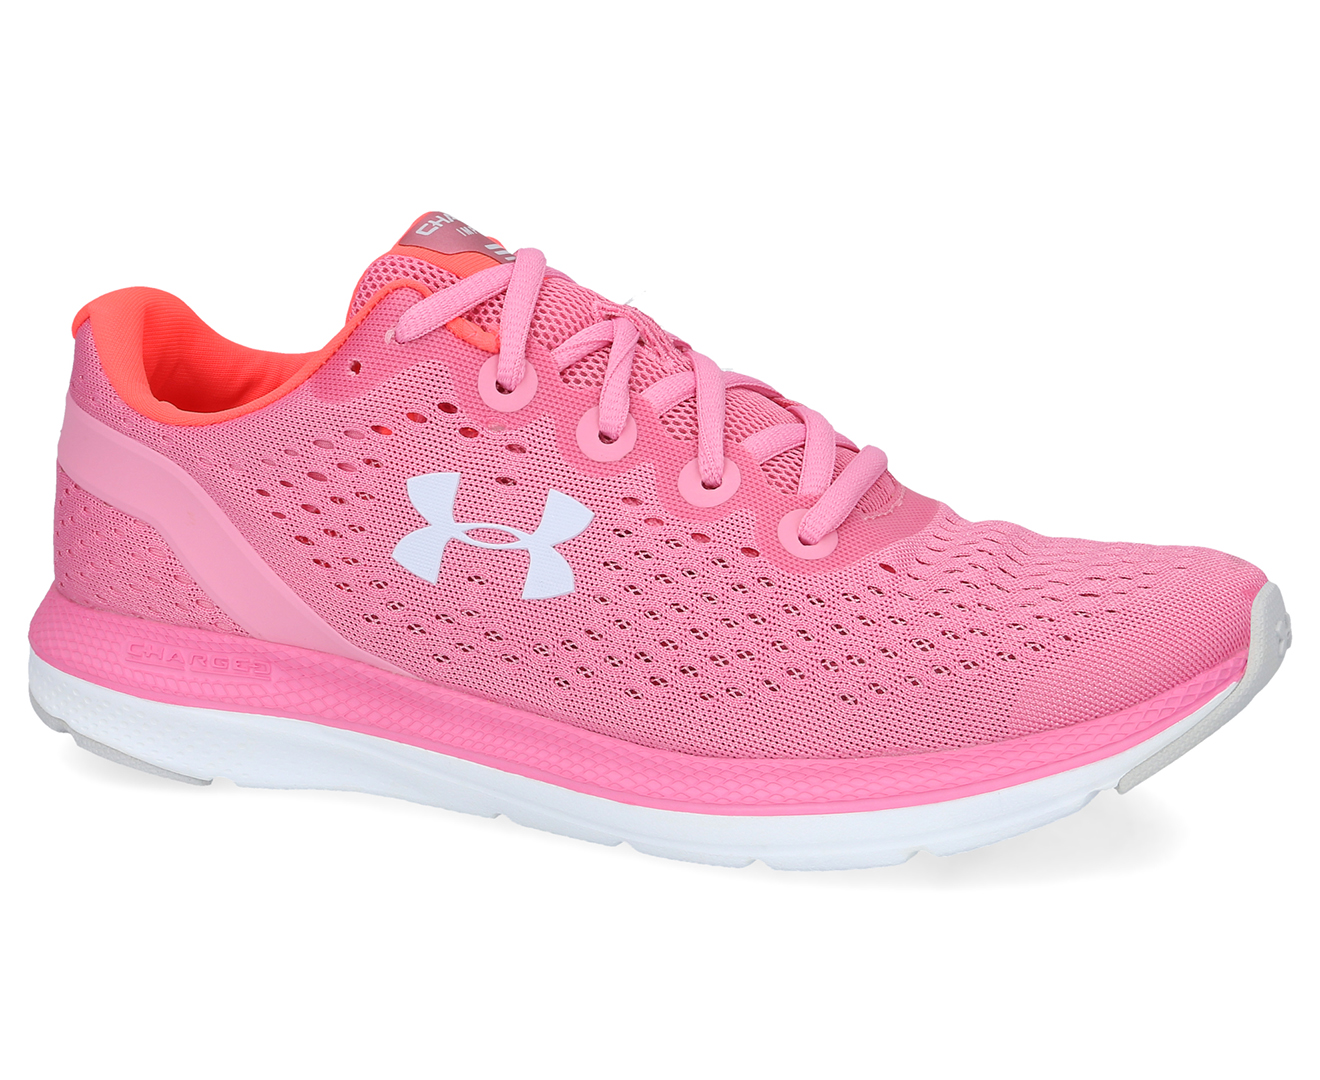 Under Armour Women's UA Charged Impulse Running Shoes - Pink | Catch.com.au